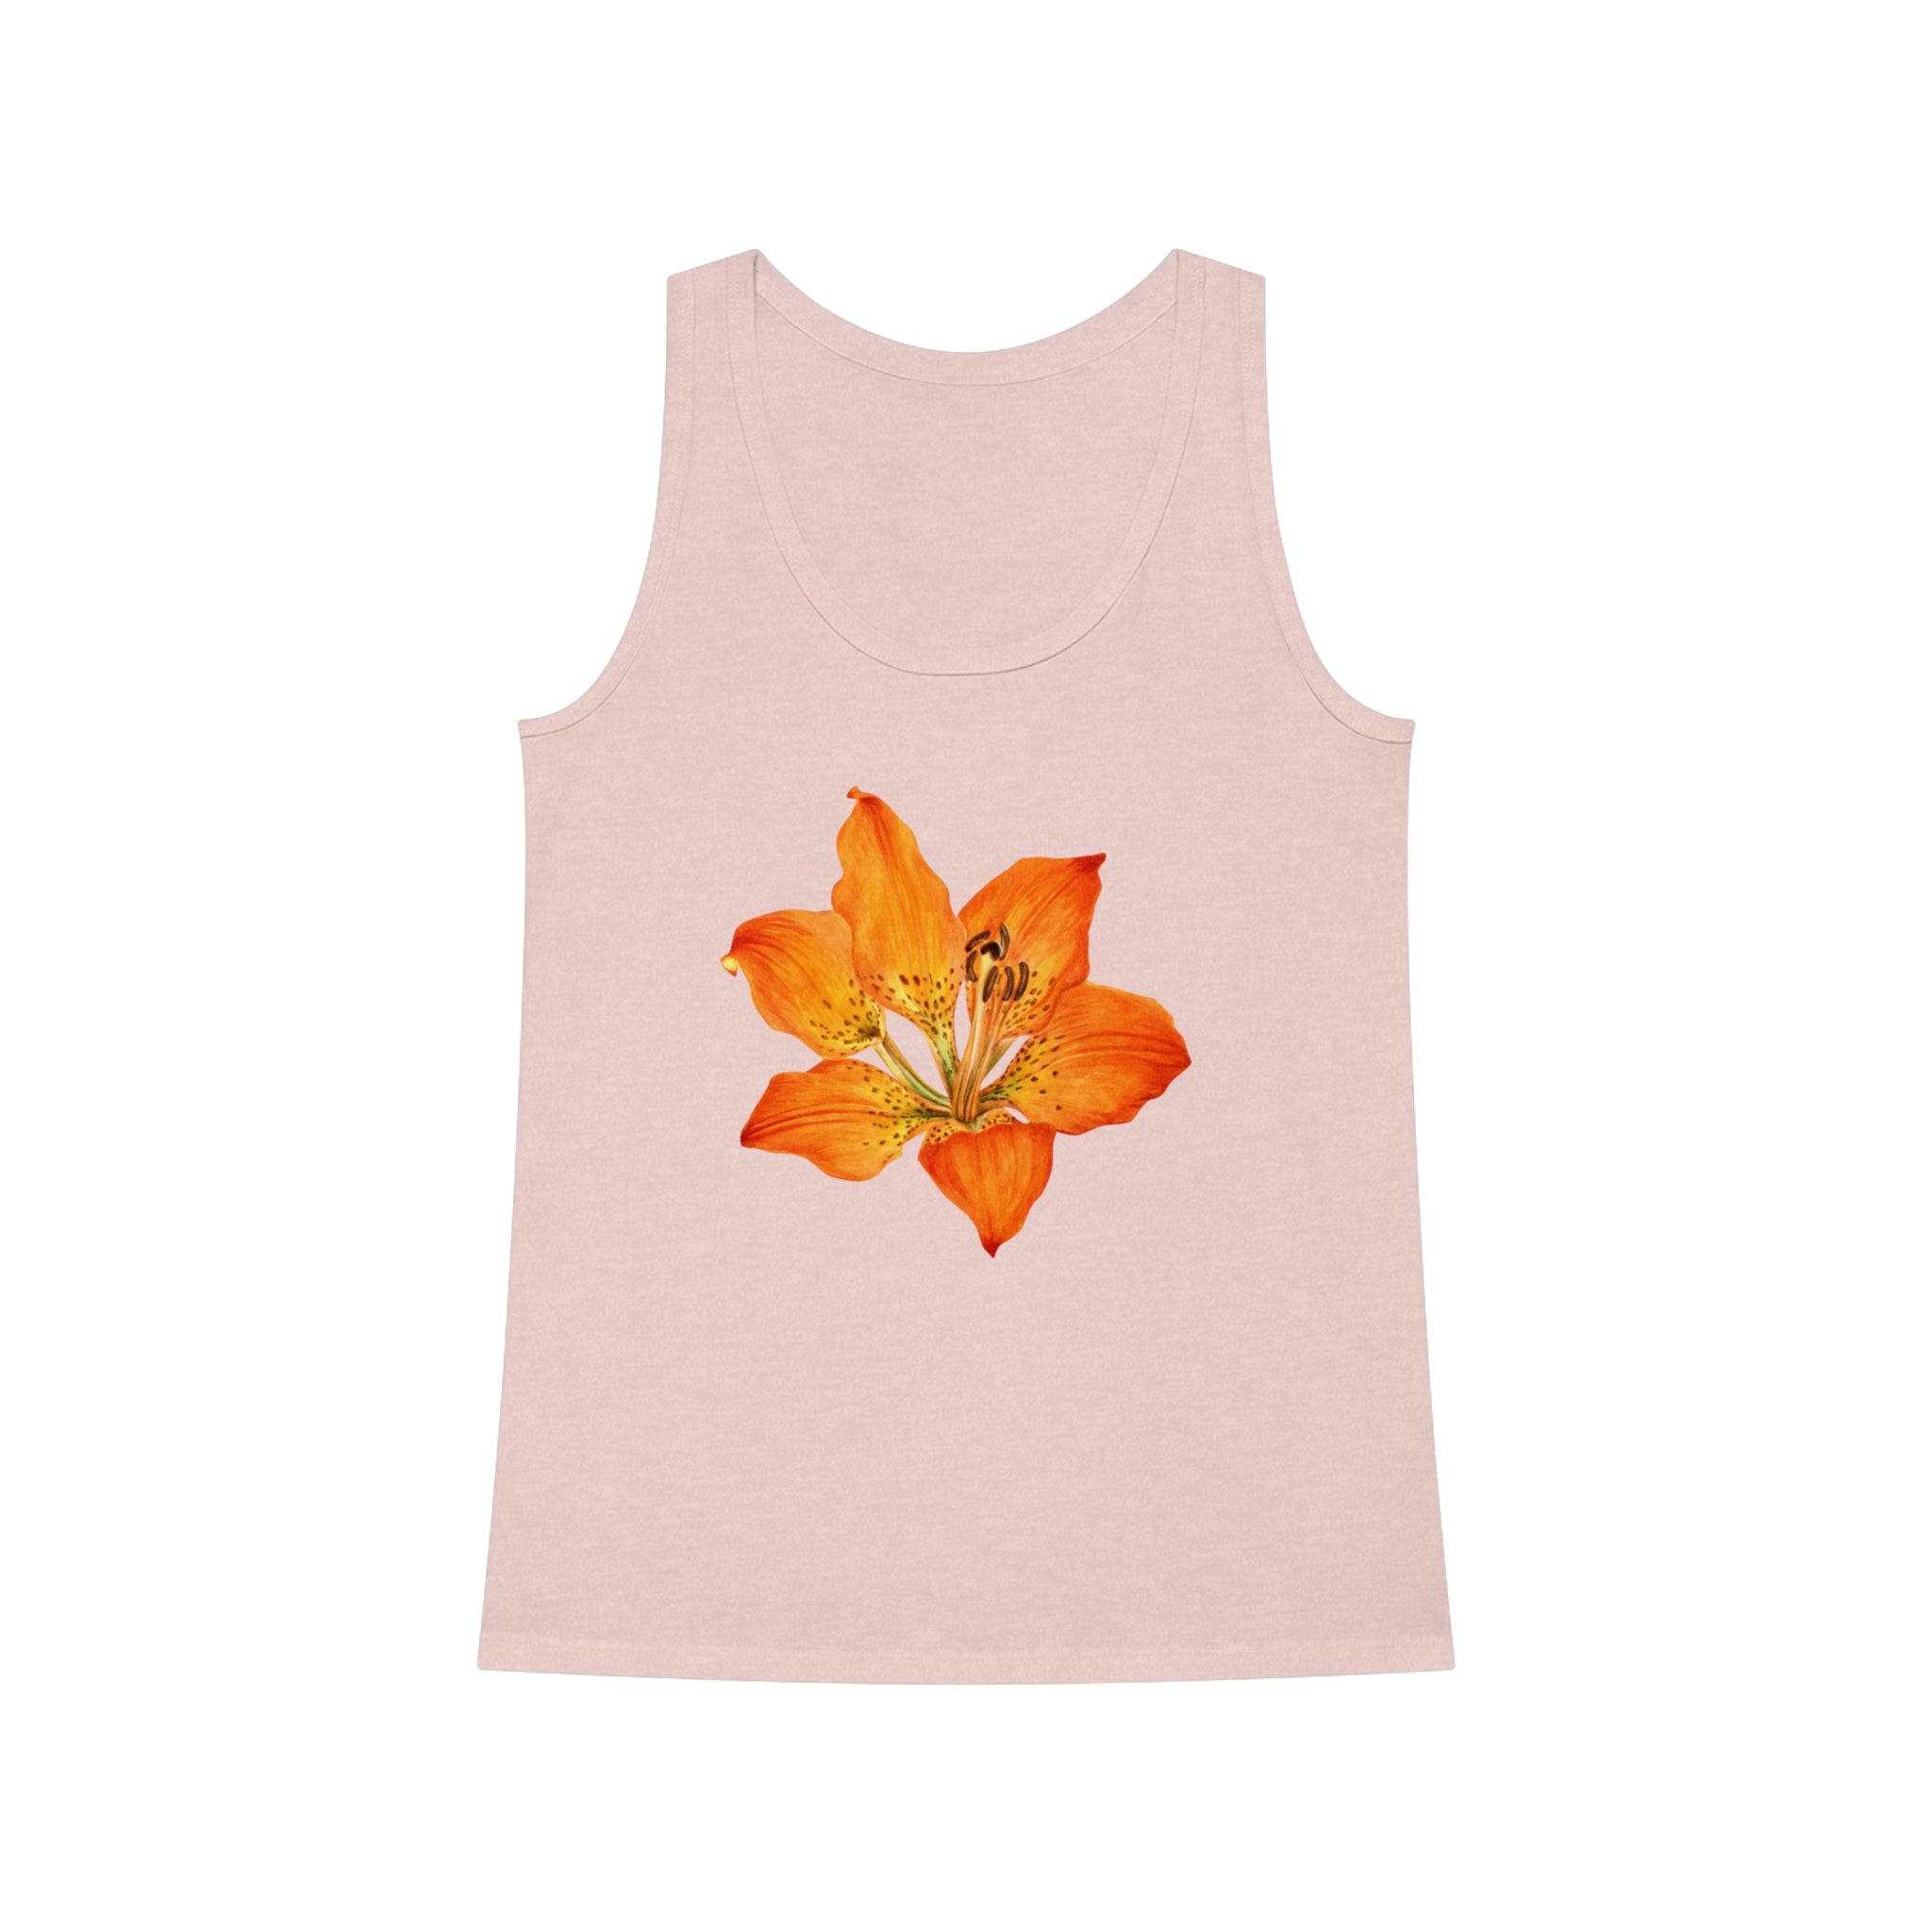 Organic cotton Flower Boom tank top with an orange lily design.